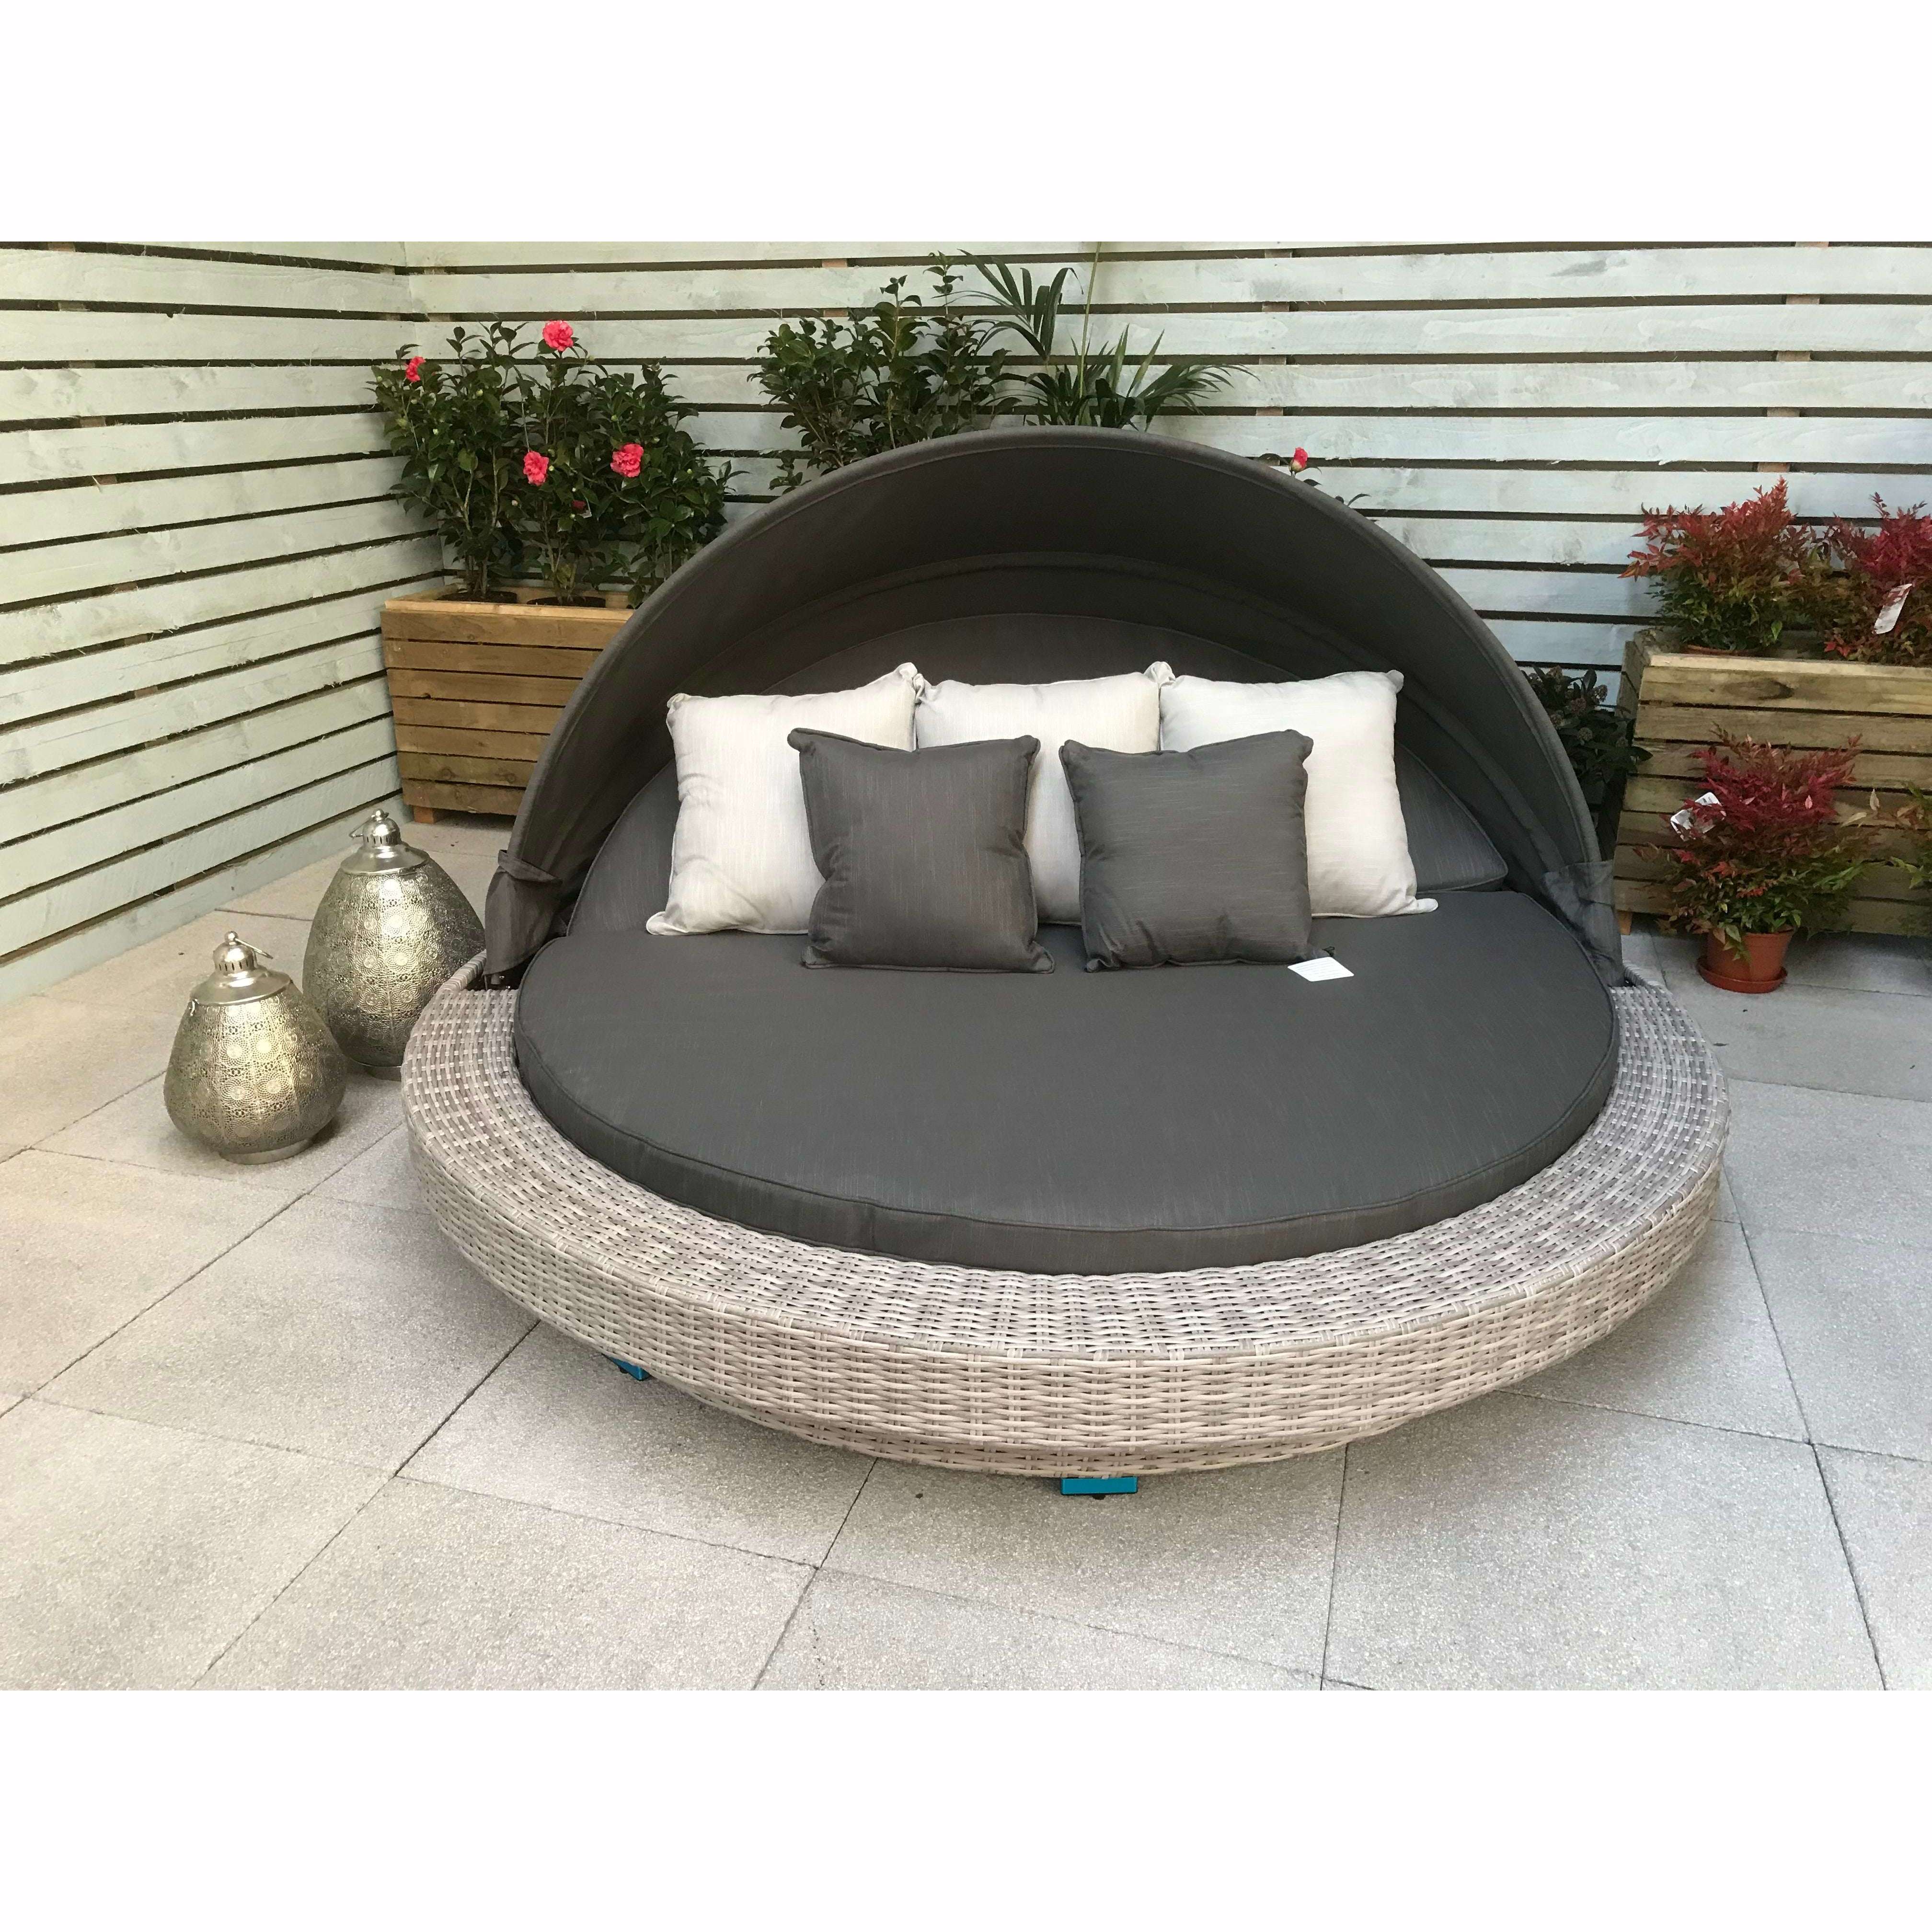 Exceptional Garden:Signature Weave Madison Daybed - Grey